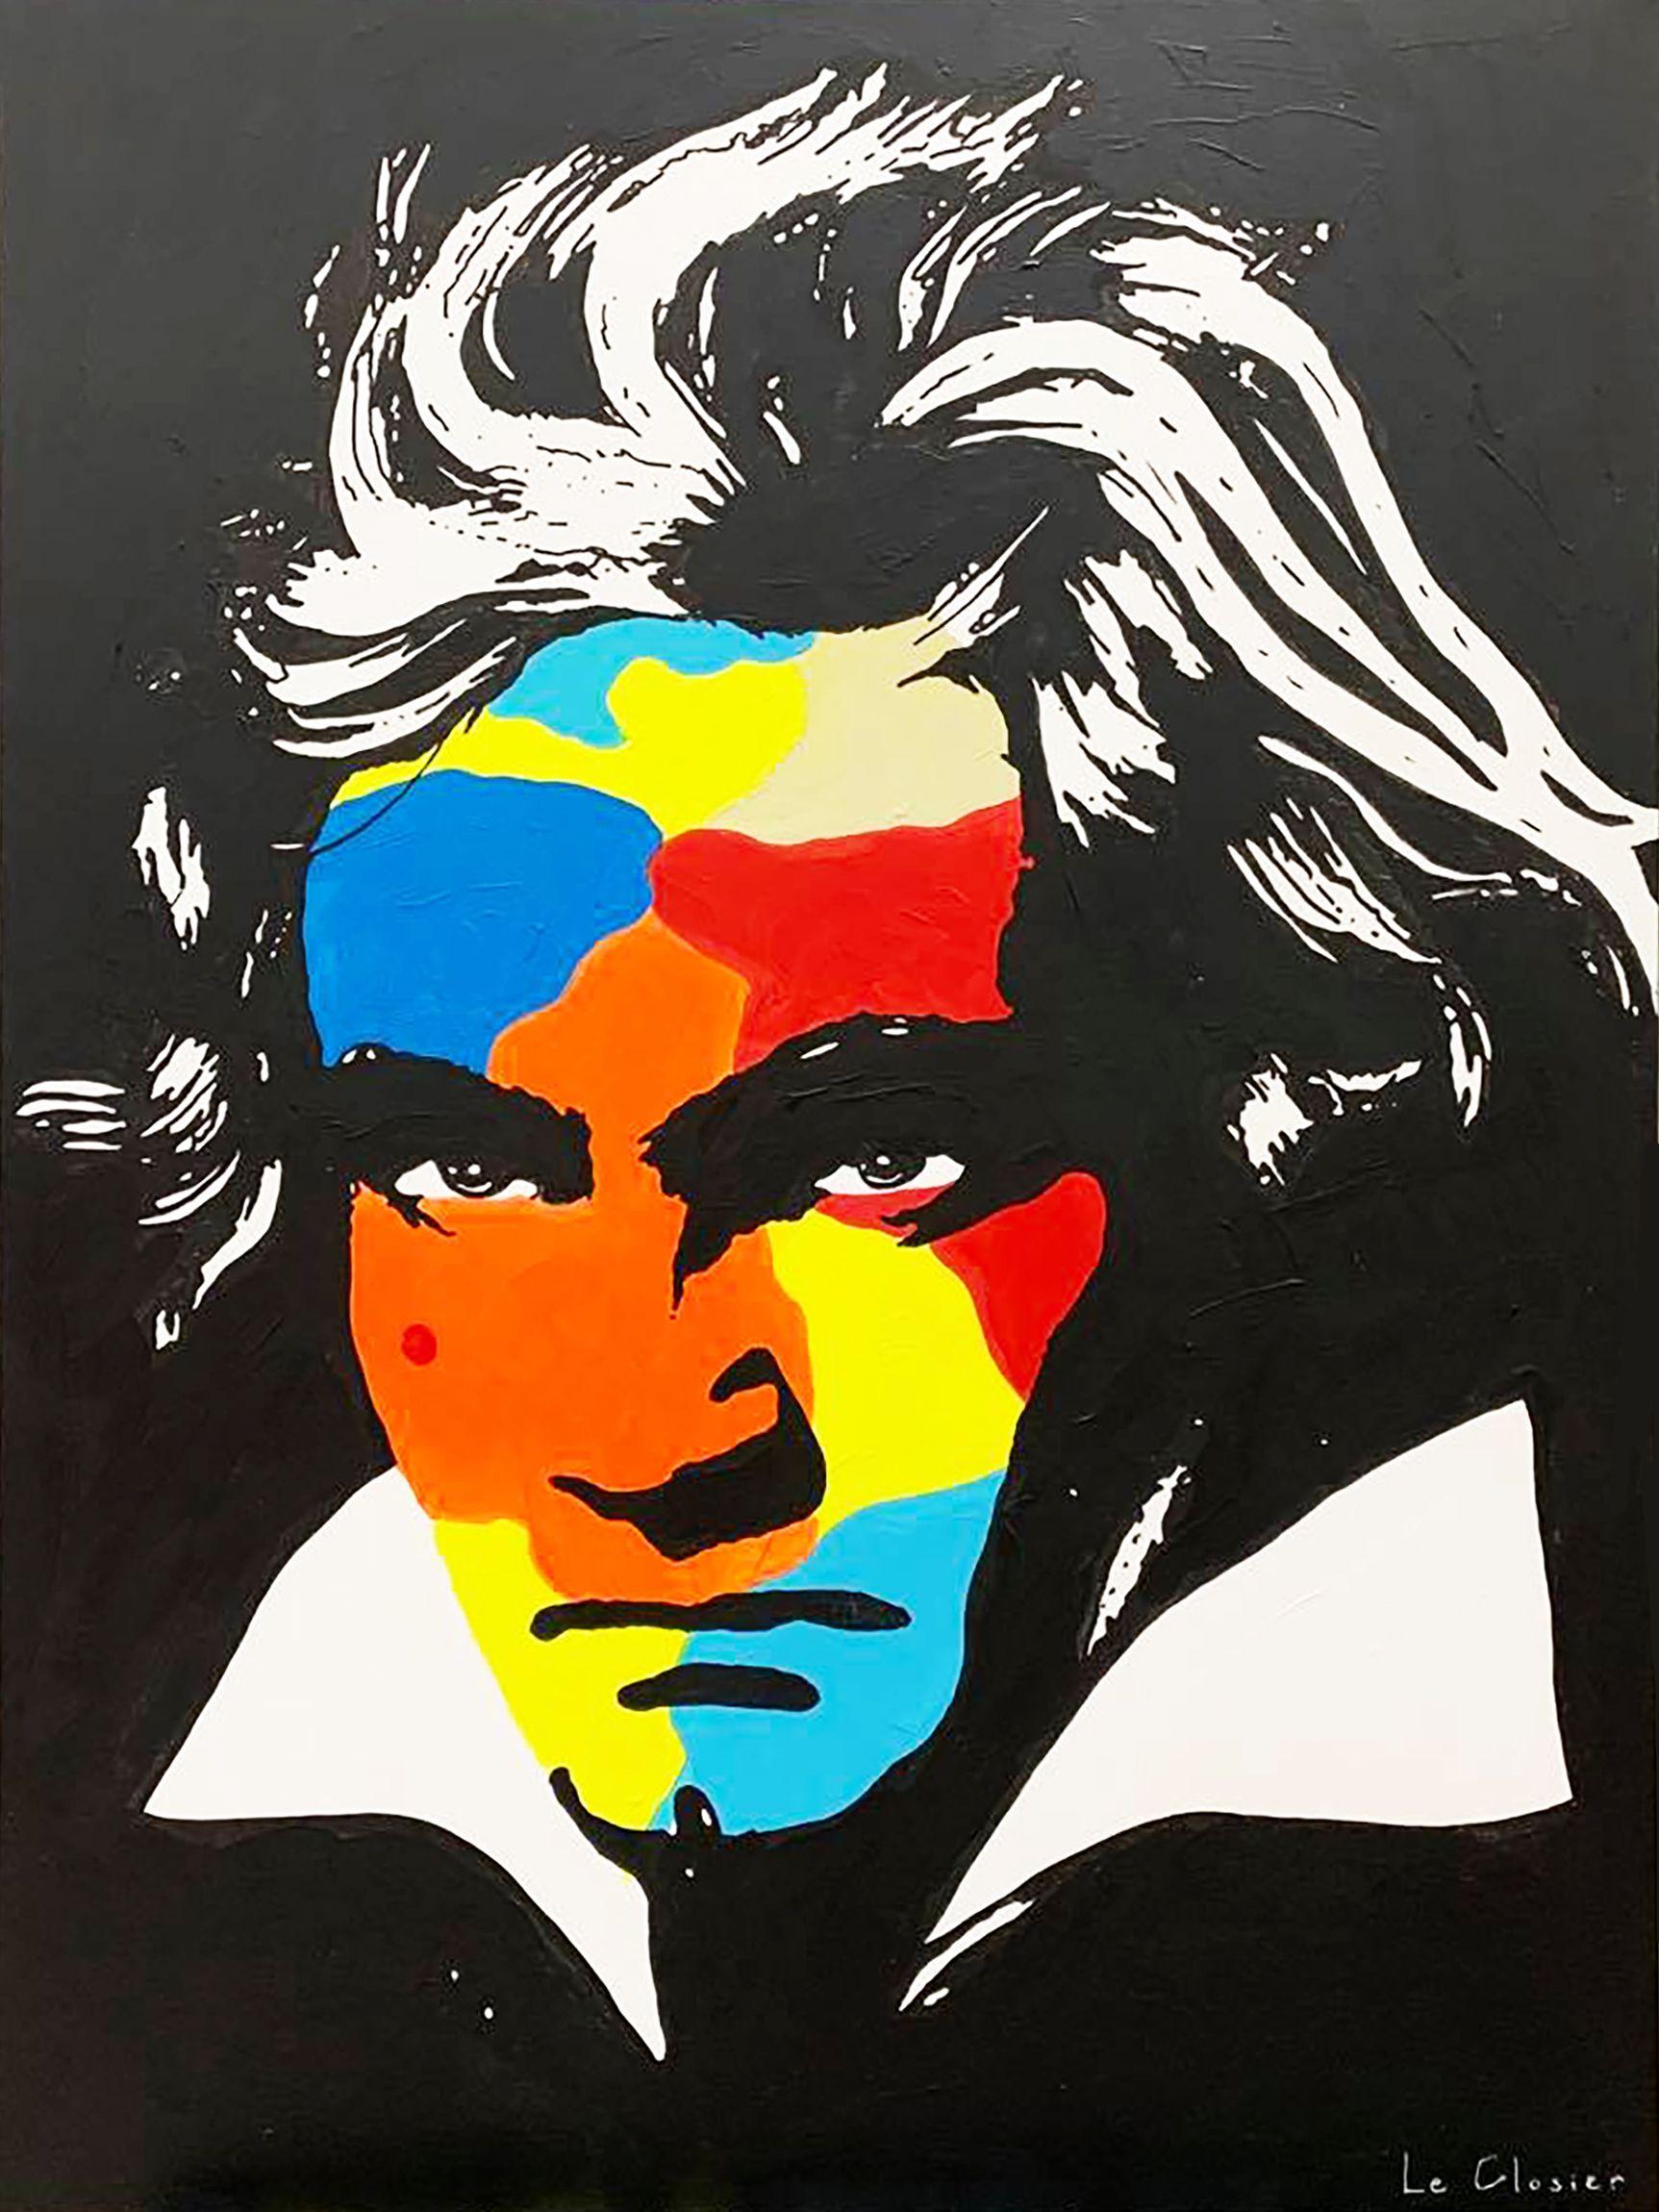 Ludwig van Beethoven (1770 â€“1827) was a German composer and pianist.   He is one of the most admired composers in the history of Western music.  Original painting.  Acrylic on canvas.  30"x 40" (76cm x 101cm).  Ready to hang. :: Painting ::